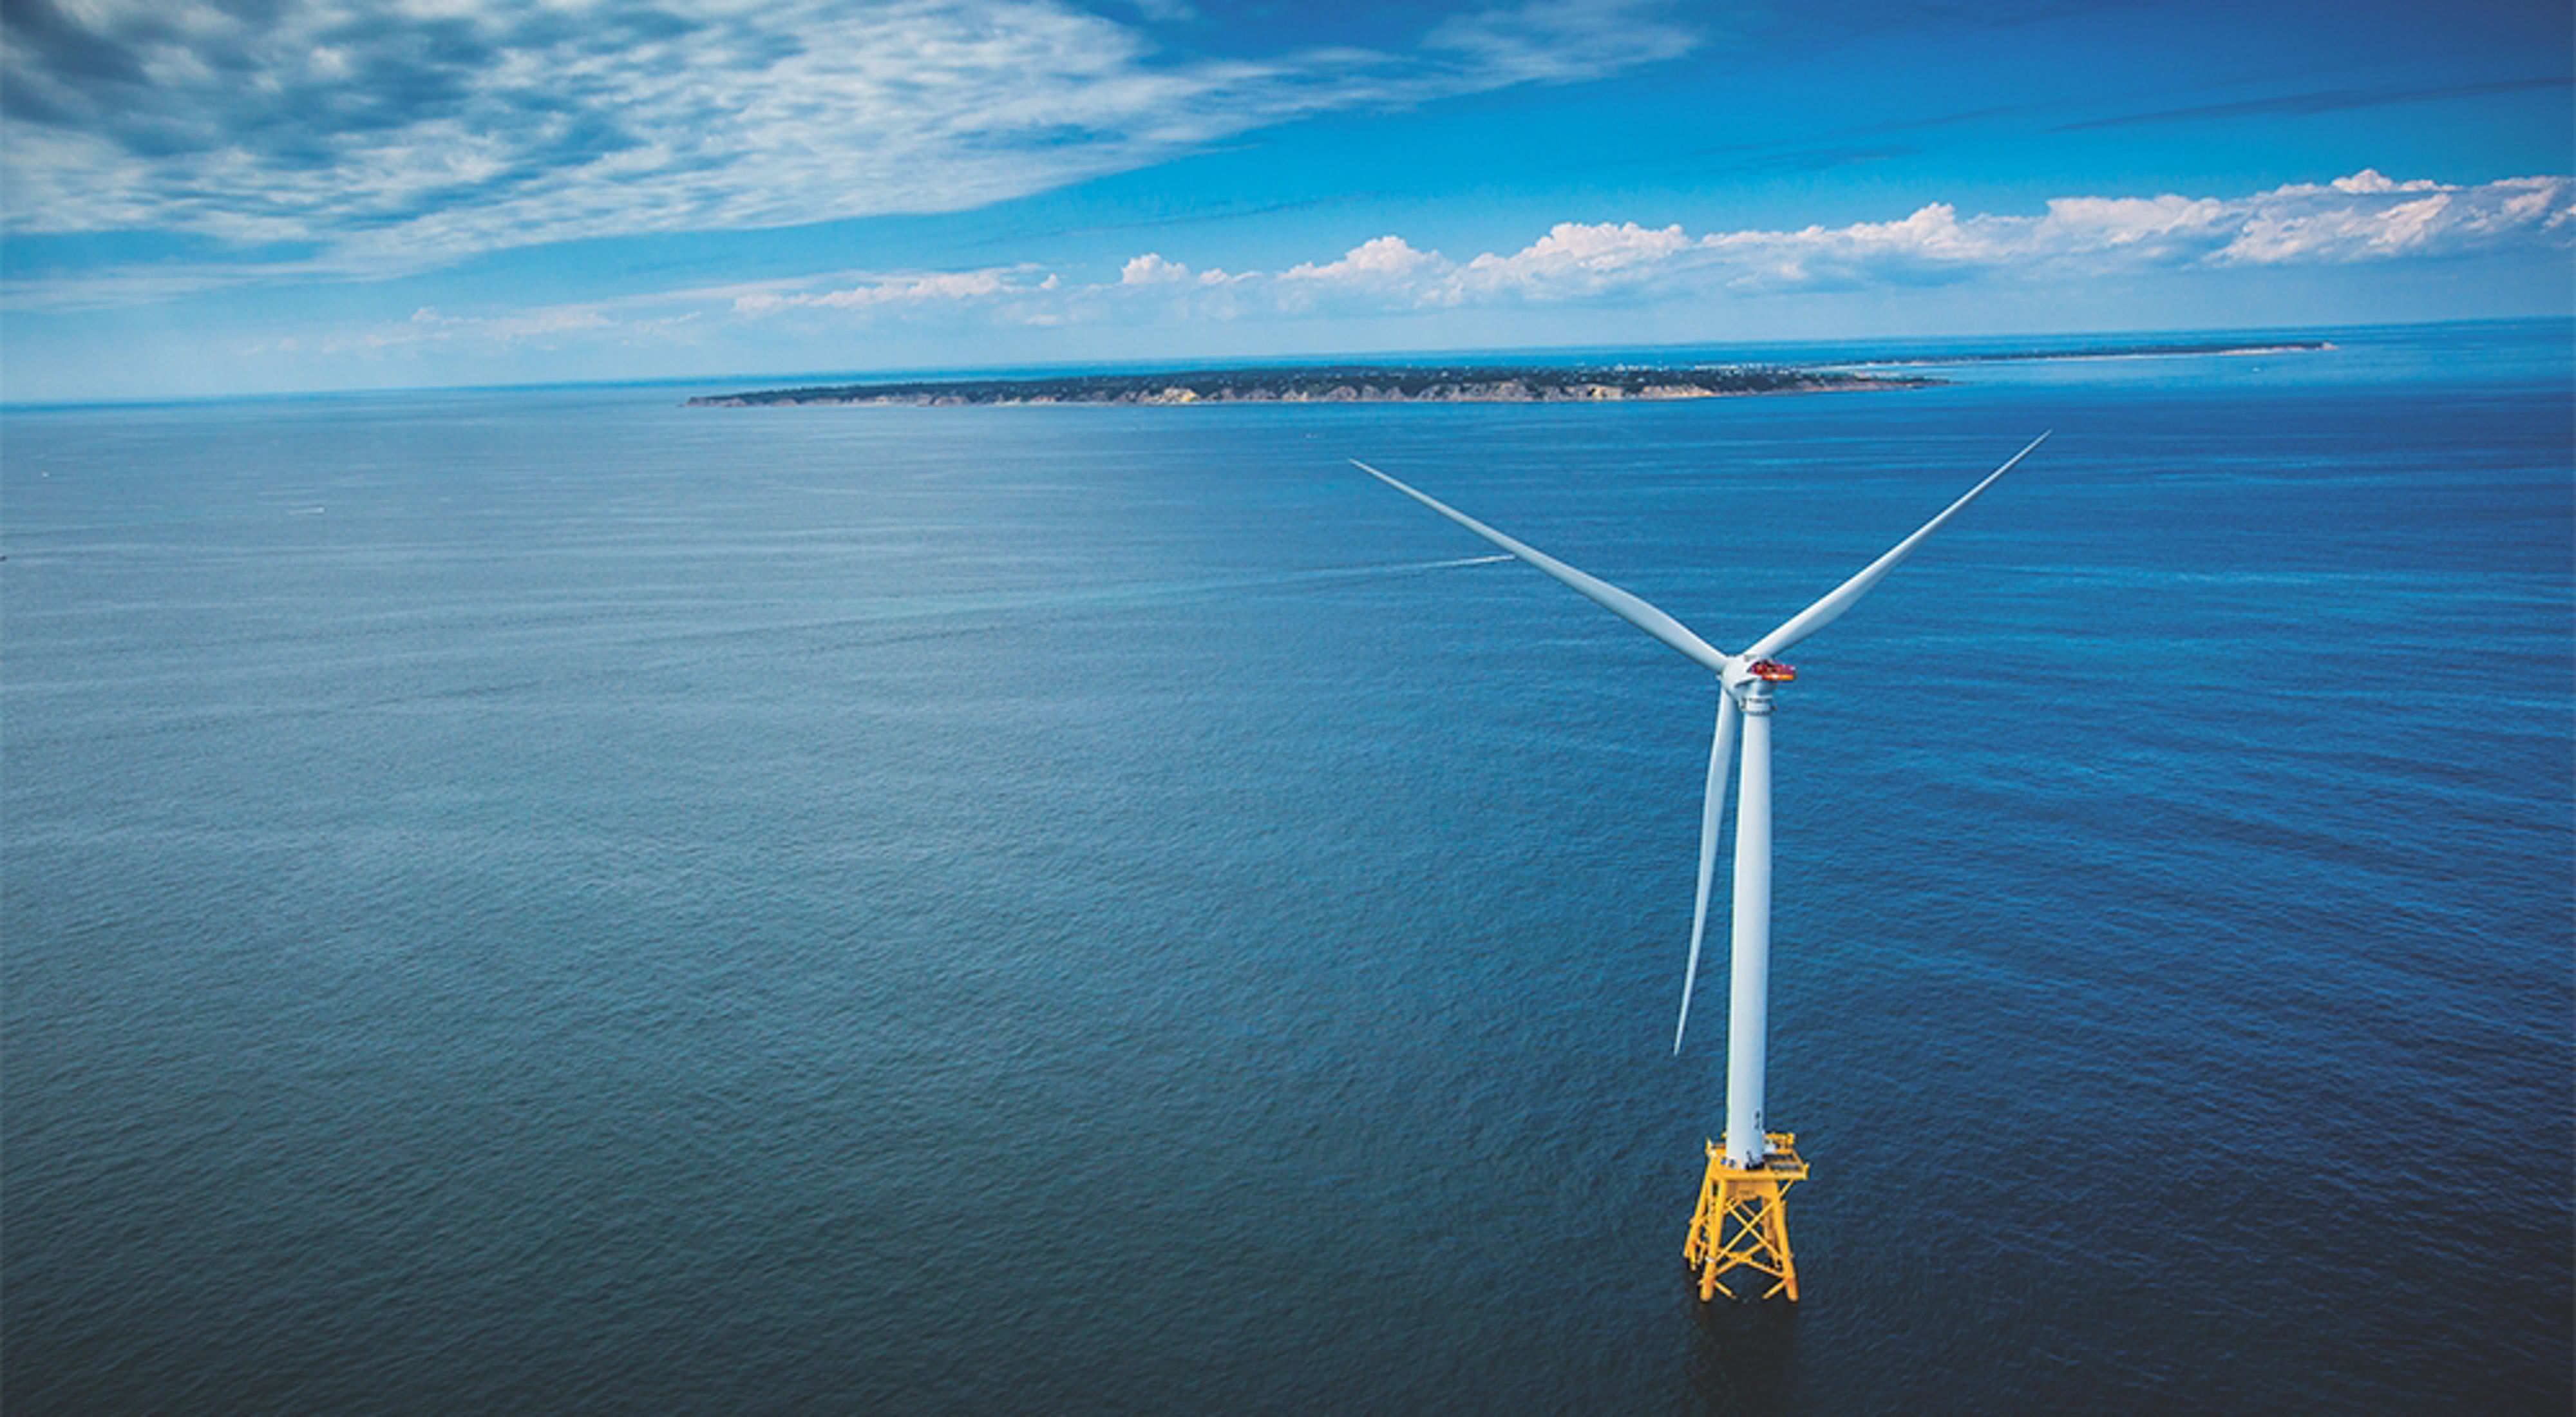 An aerial view of a wind turbine in the ocean with the coast of Block Island and Rhode Island in the background.